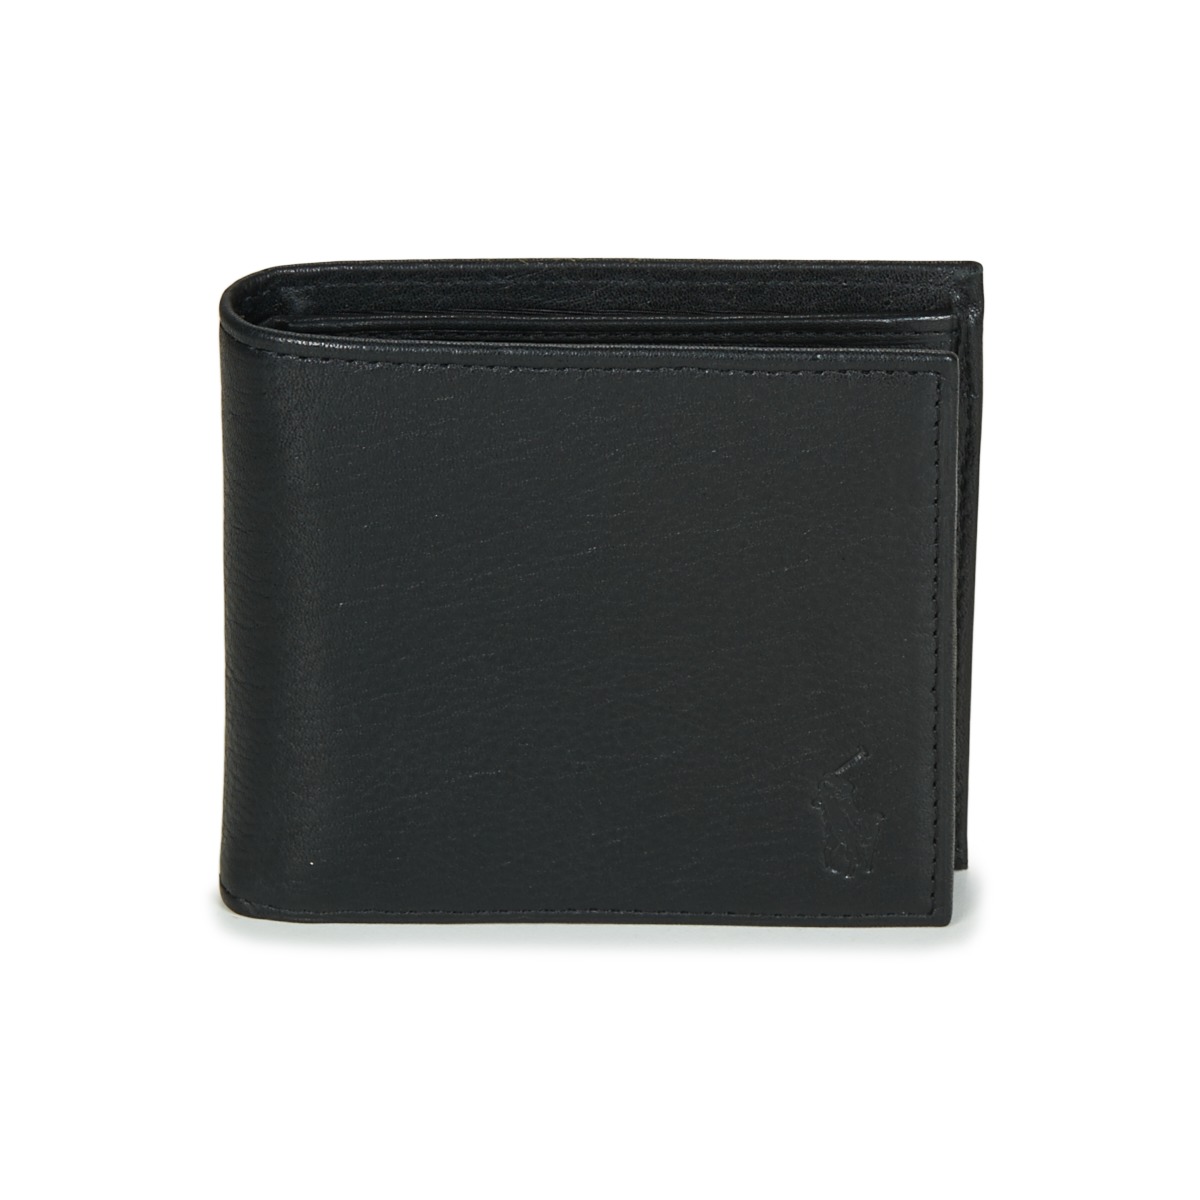 Polo Ralph Lauren EU BILL W/ C-WALLET-SMOOTH LEATHER Black - Fast delivery  | Spartoo Europe ! - Bags Wallets Men 98,00 €